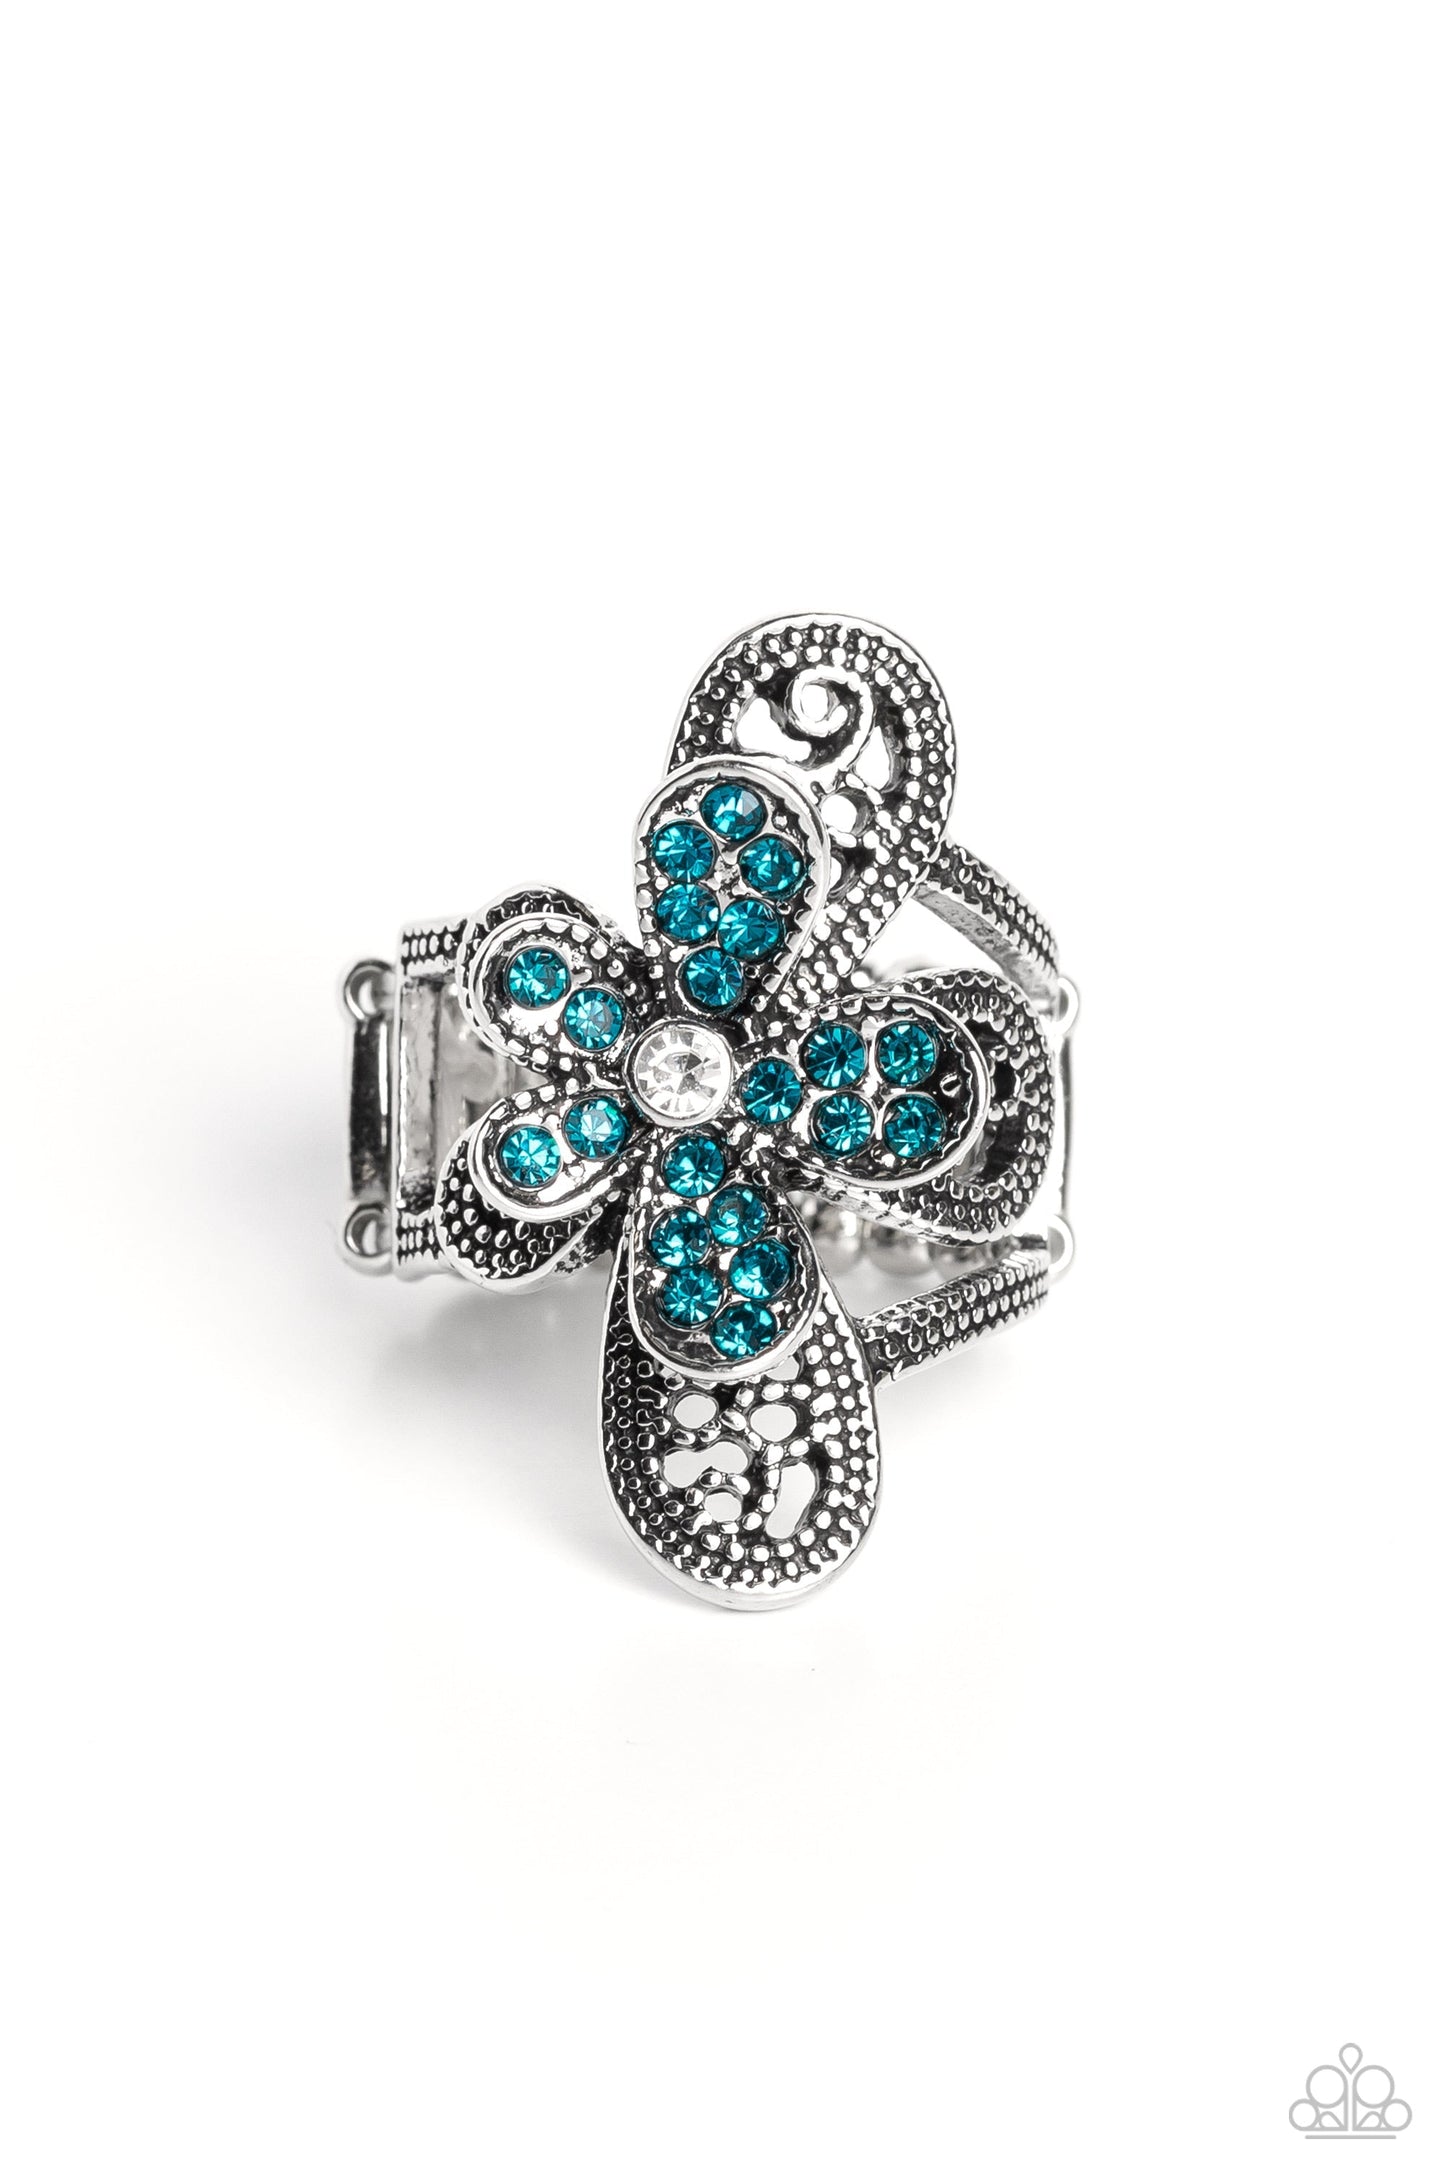 Garden Escapade - Blue Ring - Paparazzi Accessories - Dotted with a dainty white rhinestone center, silver petals overlaid with glittery blue rhinestones, sit atop studded silver filigree petals, creating a frilly floral centerpiece atop the finger.